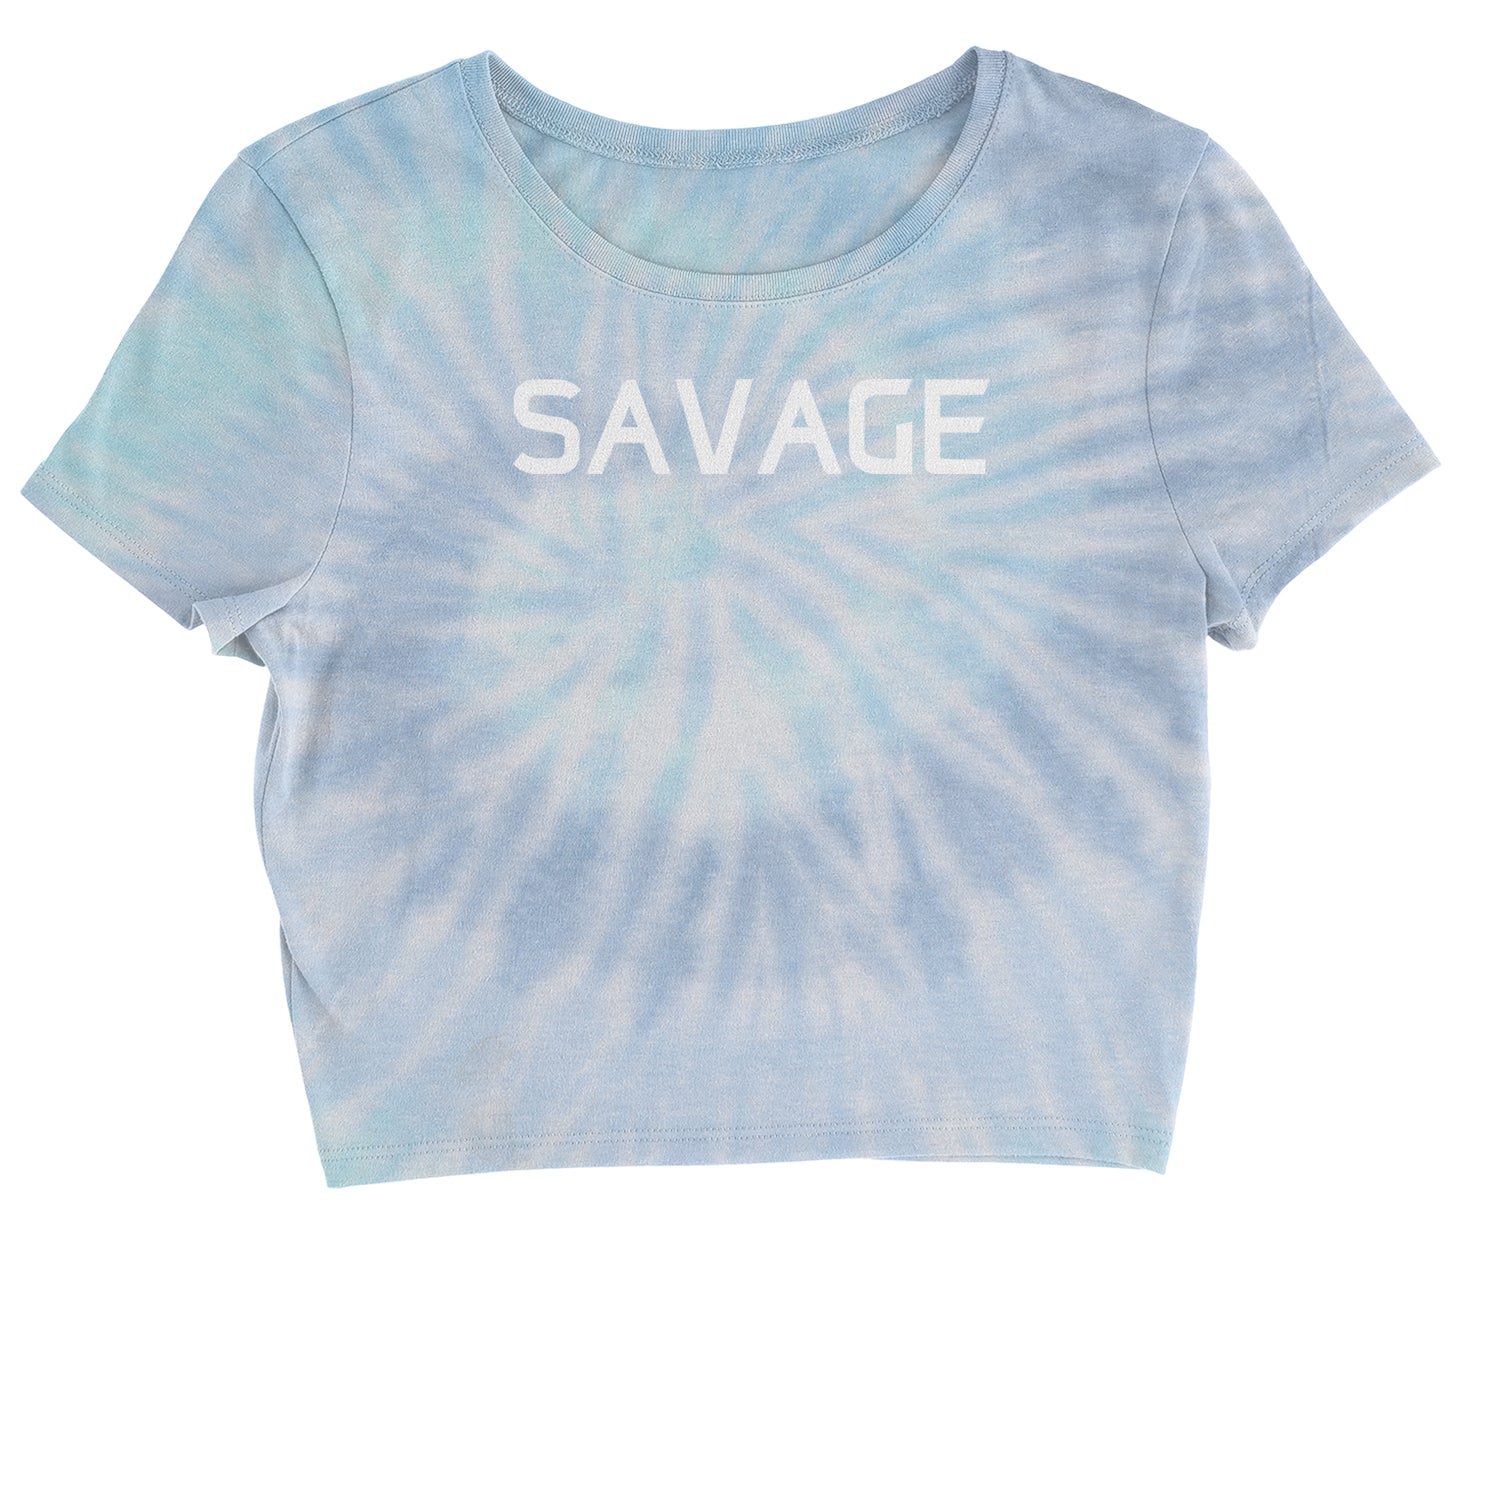 Savage Cropped T-Shirt #expressiontees by Expression Tees